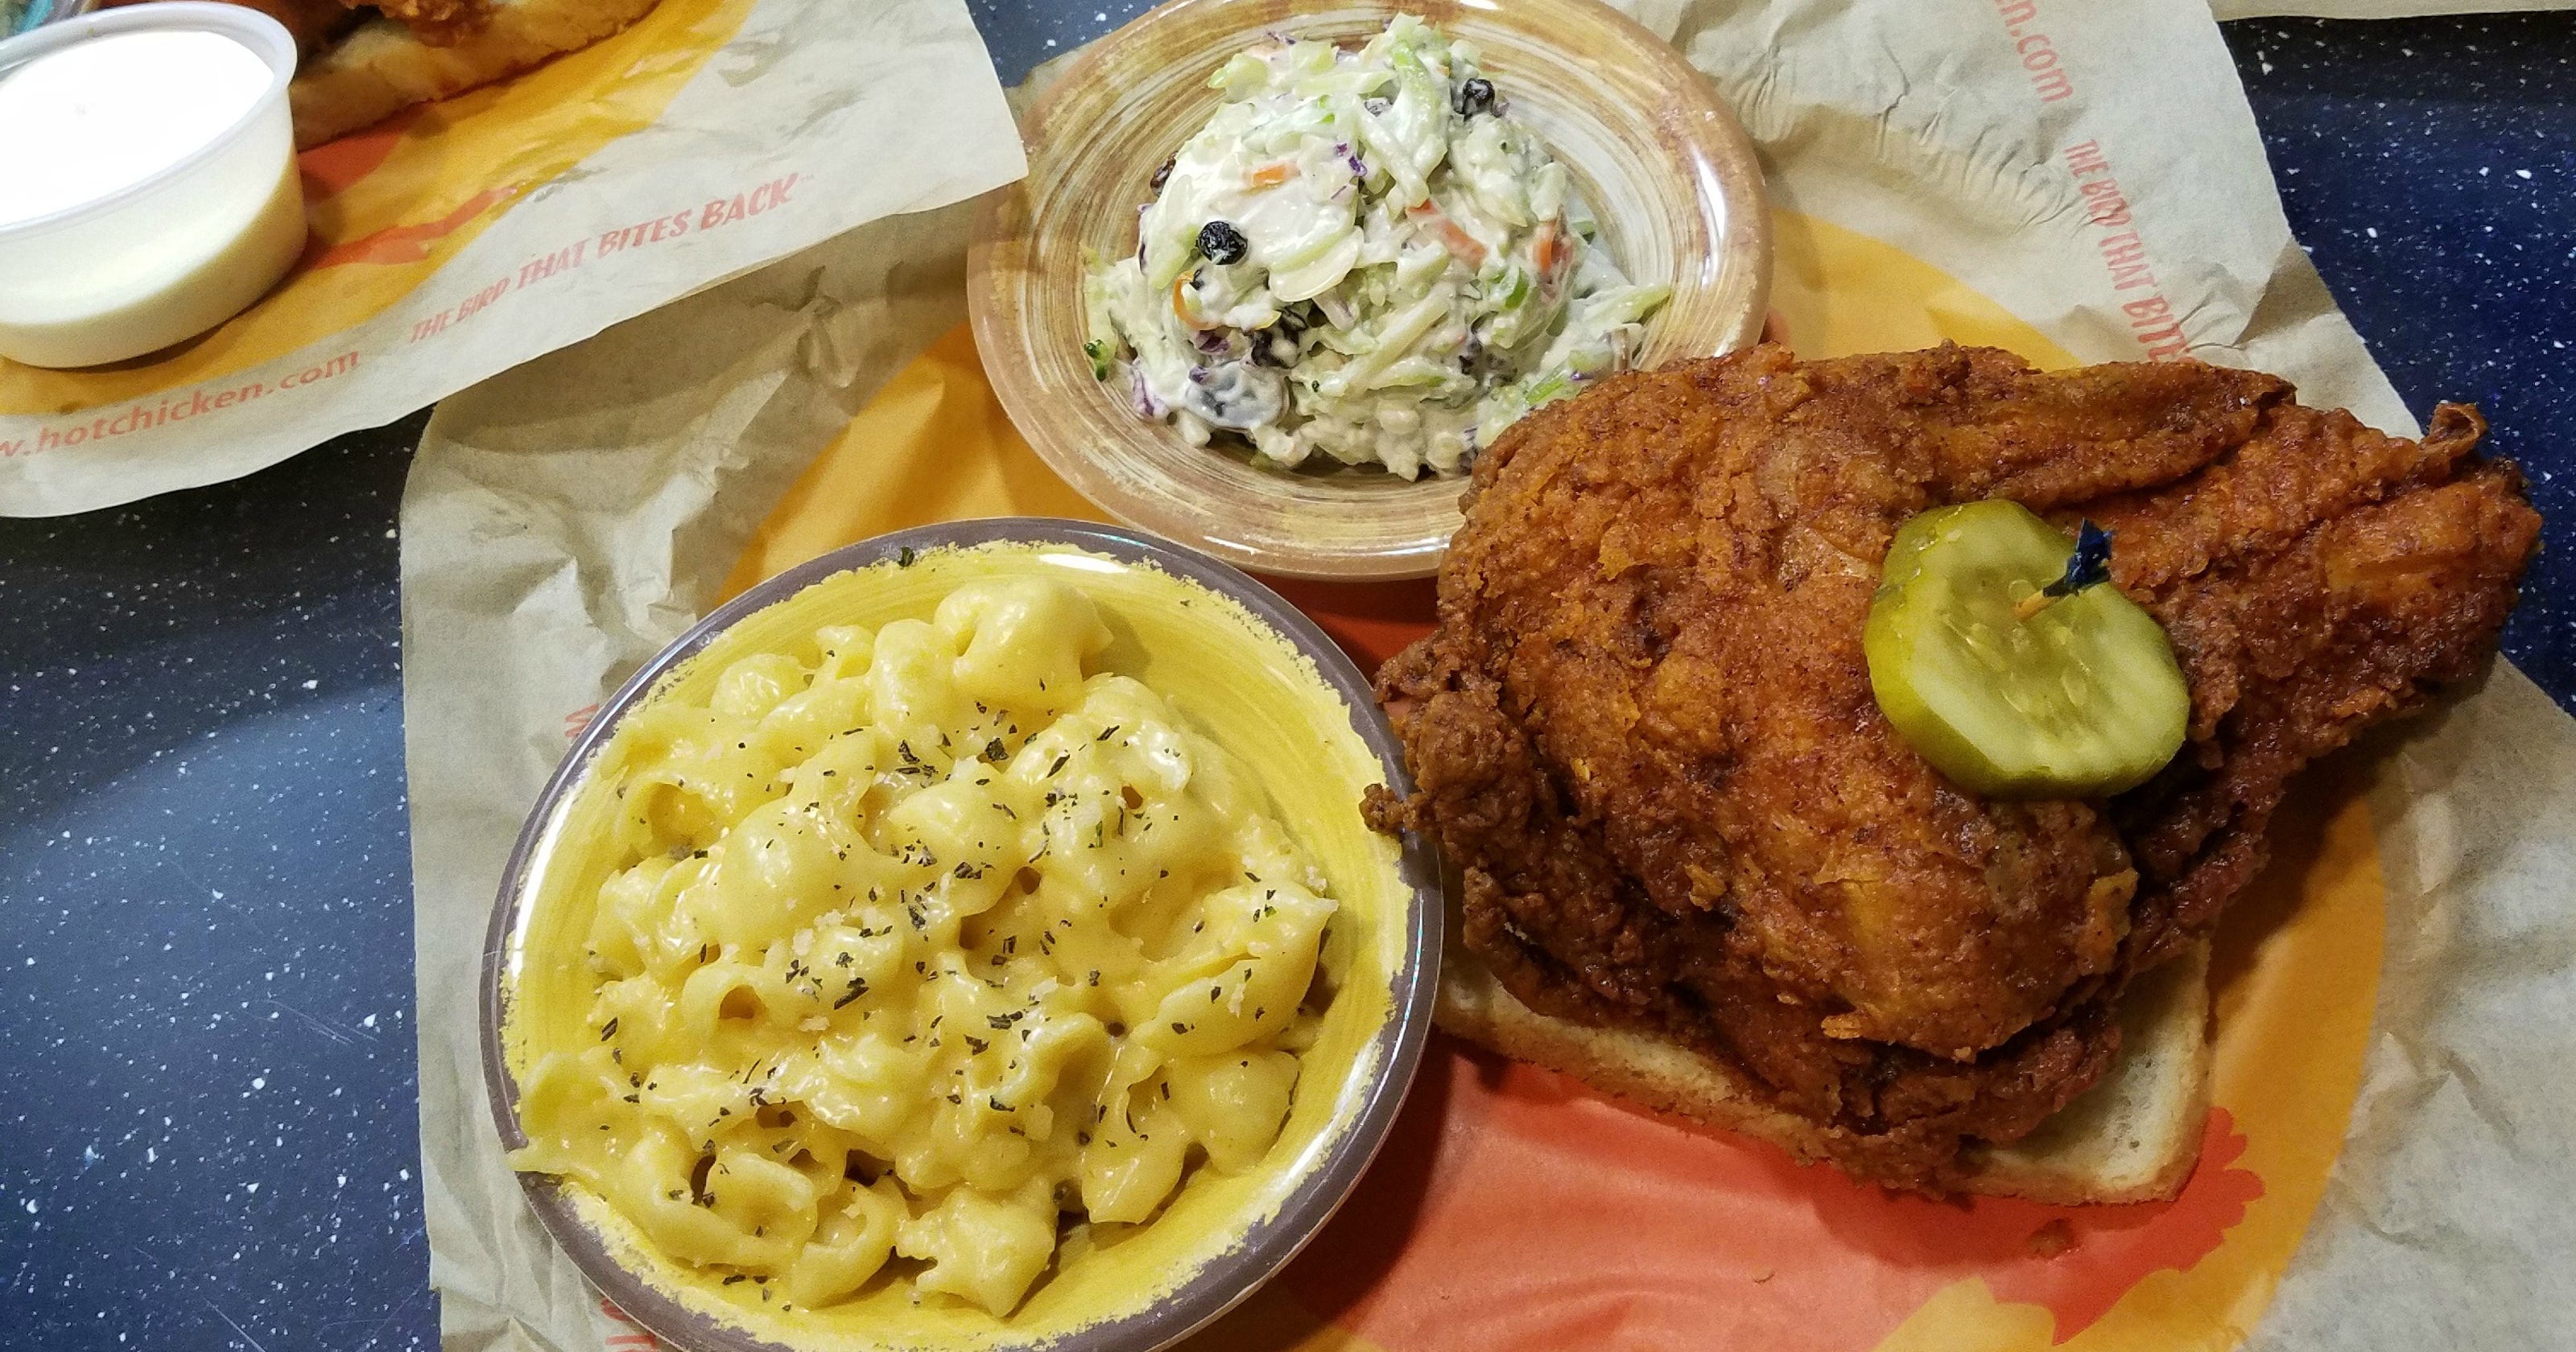 This is when Joella's Hot Chicken opens in Broad Ripple